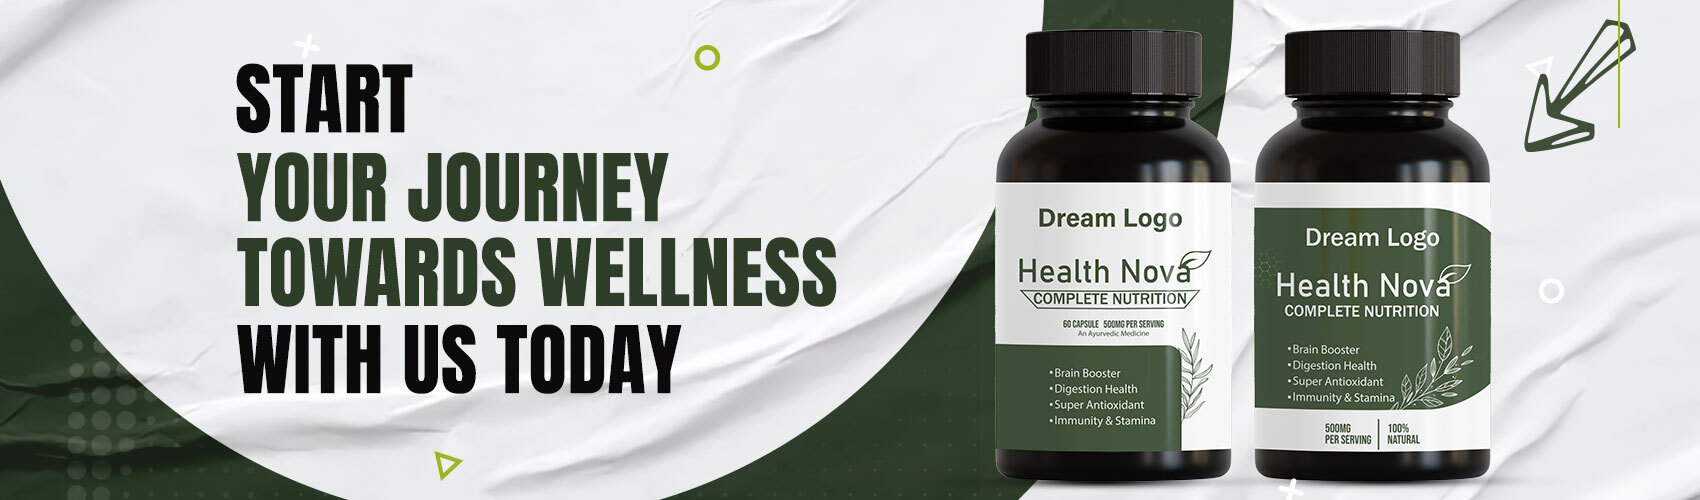 Daily Health 24 Manufacturer in India